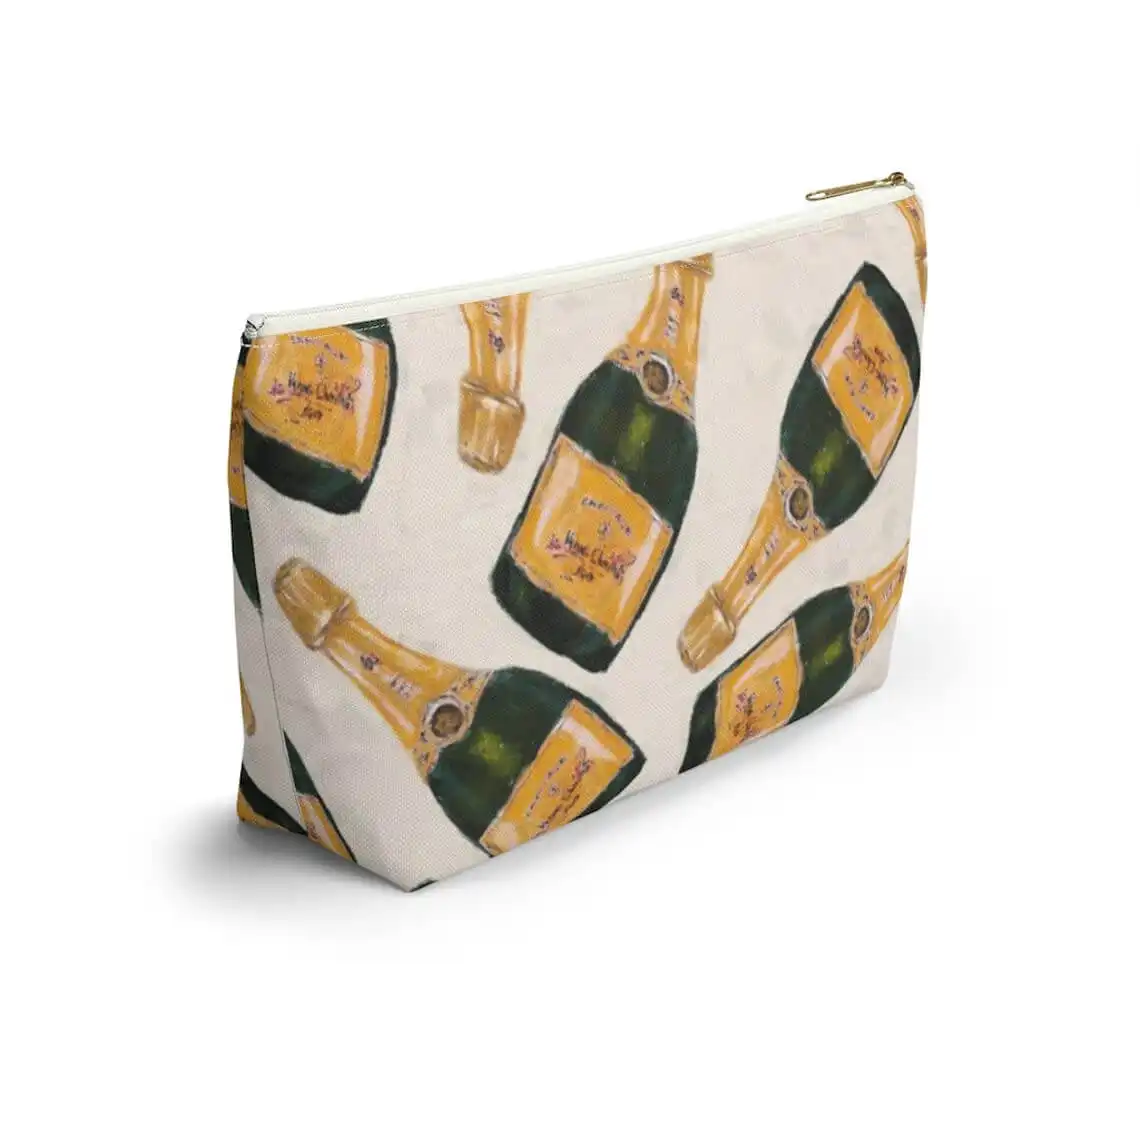 A Useful Champagne Patterned Pouch